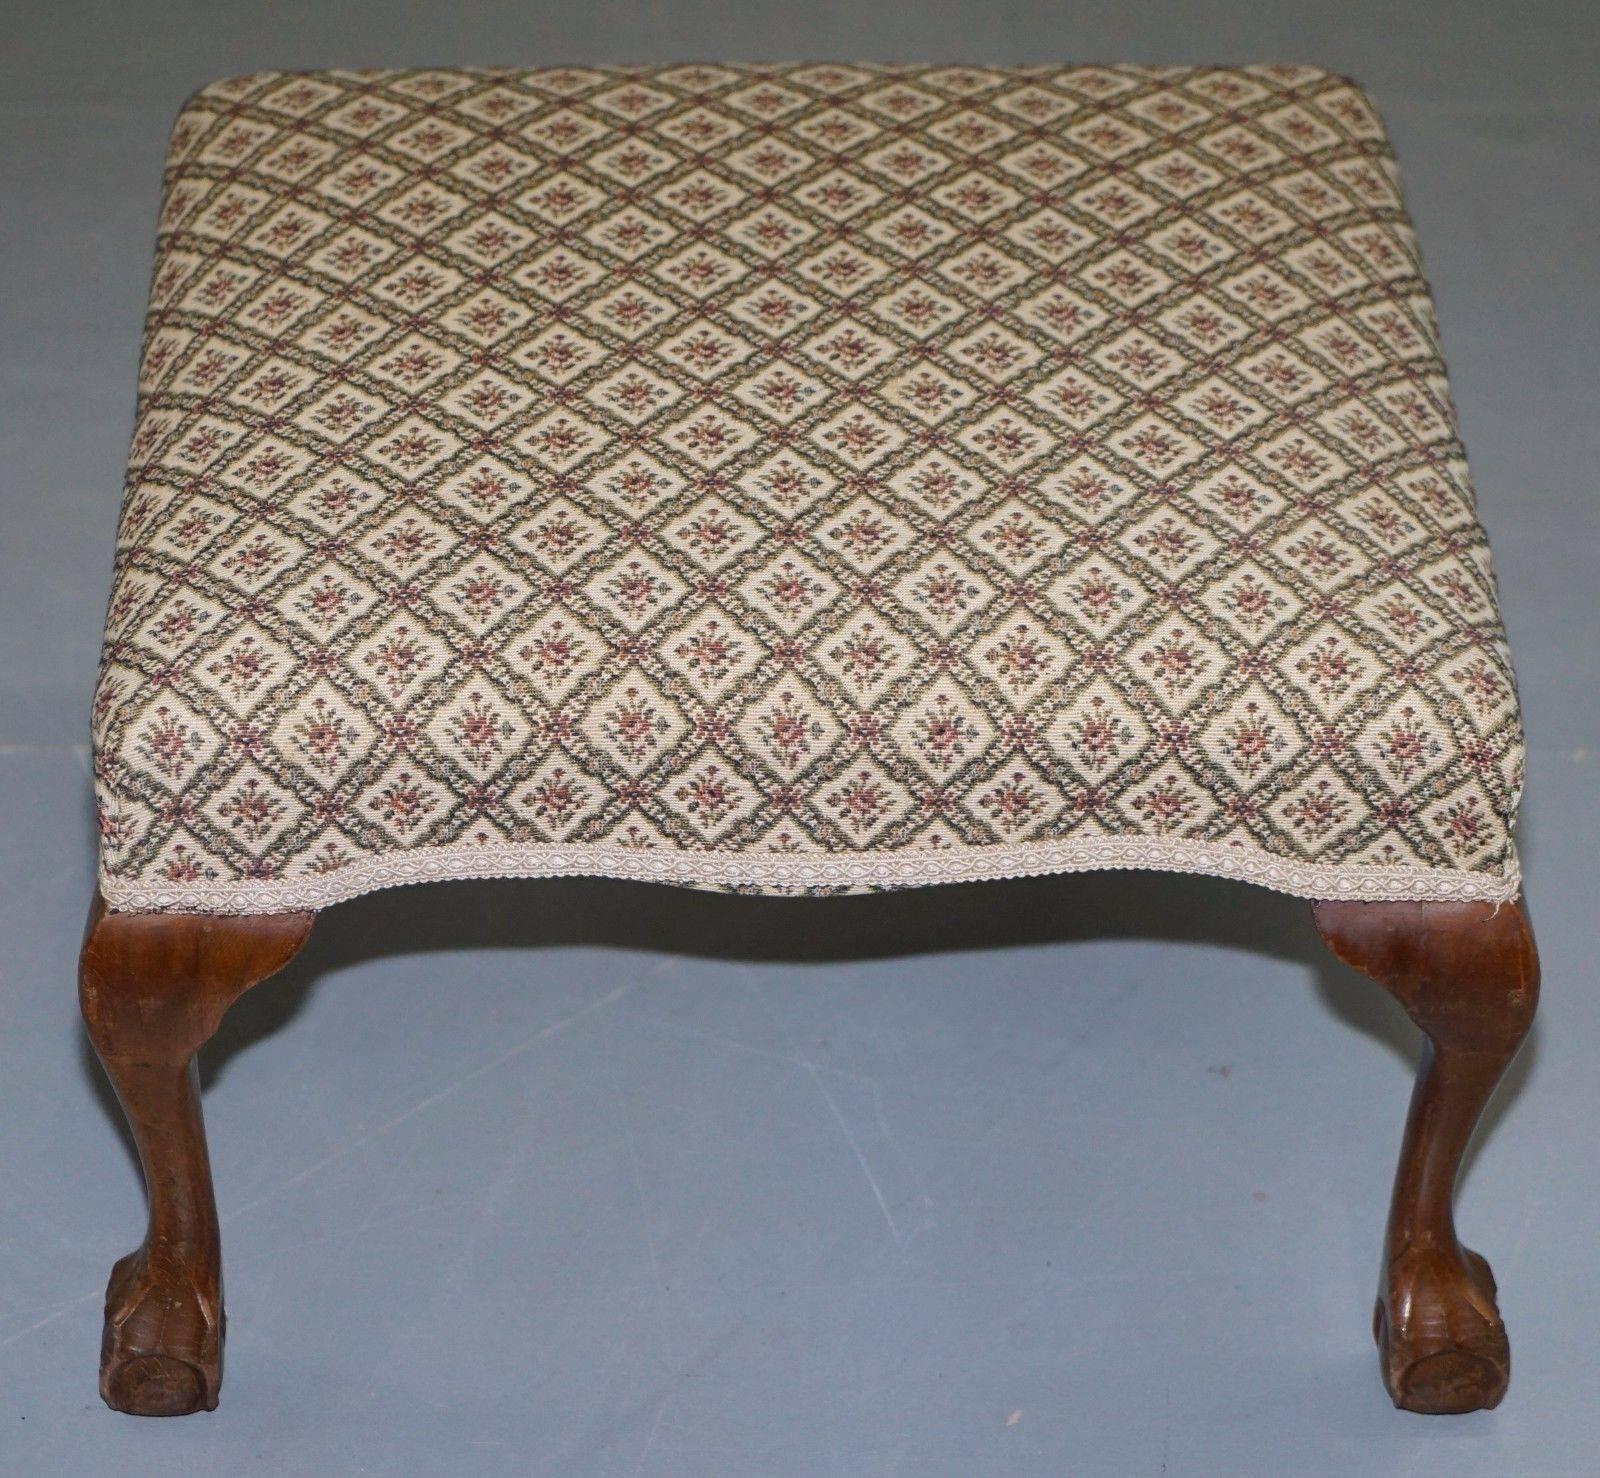 We are delighted to offer for sale this early Victorian possibly earlier walnut framed with cabriole claw and ball legs footstool

This piece is a good side, you can place their feet on it, the timber has a nice patina, I have a William and Mary